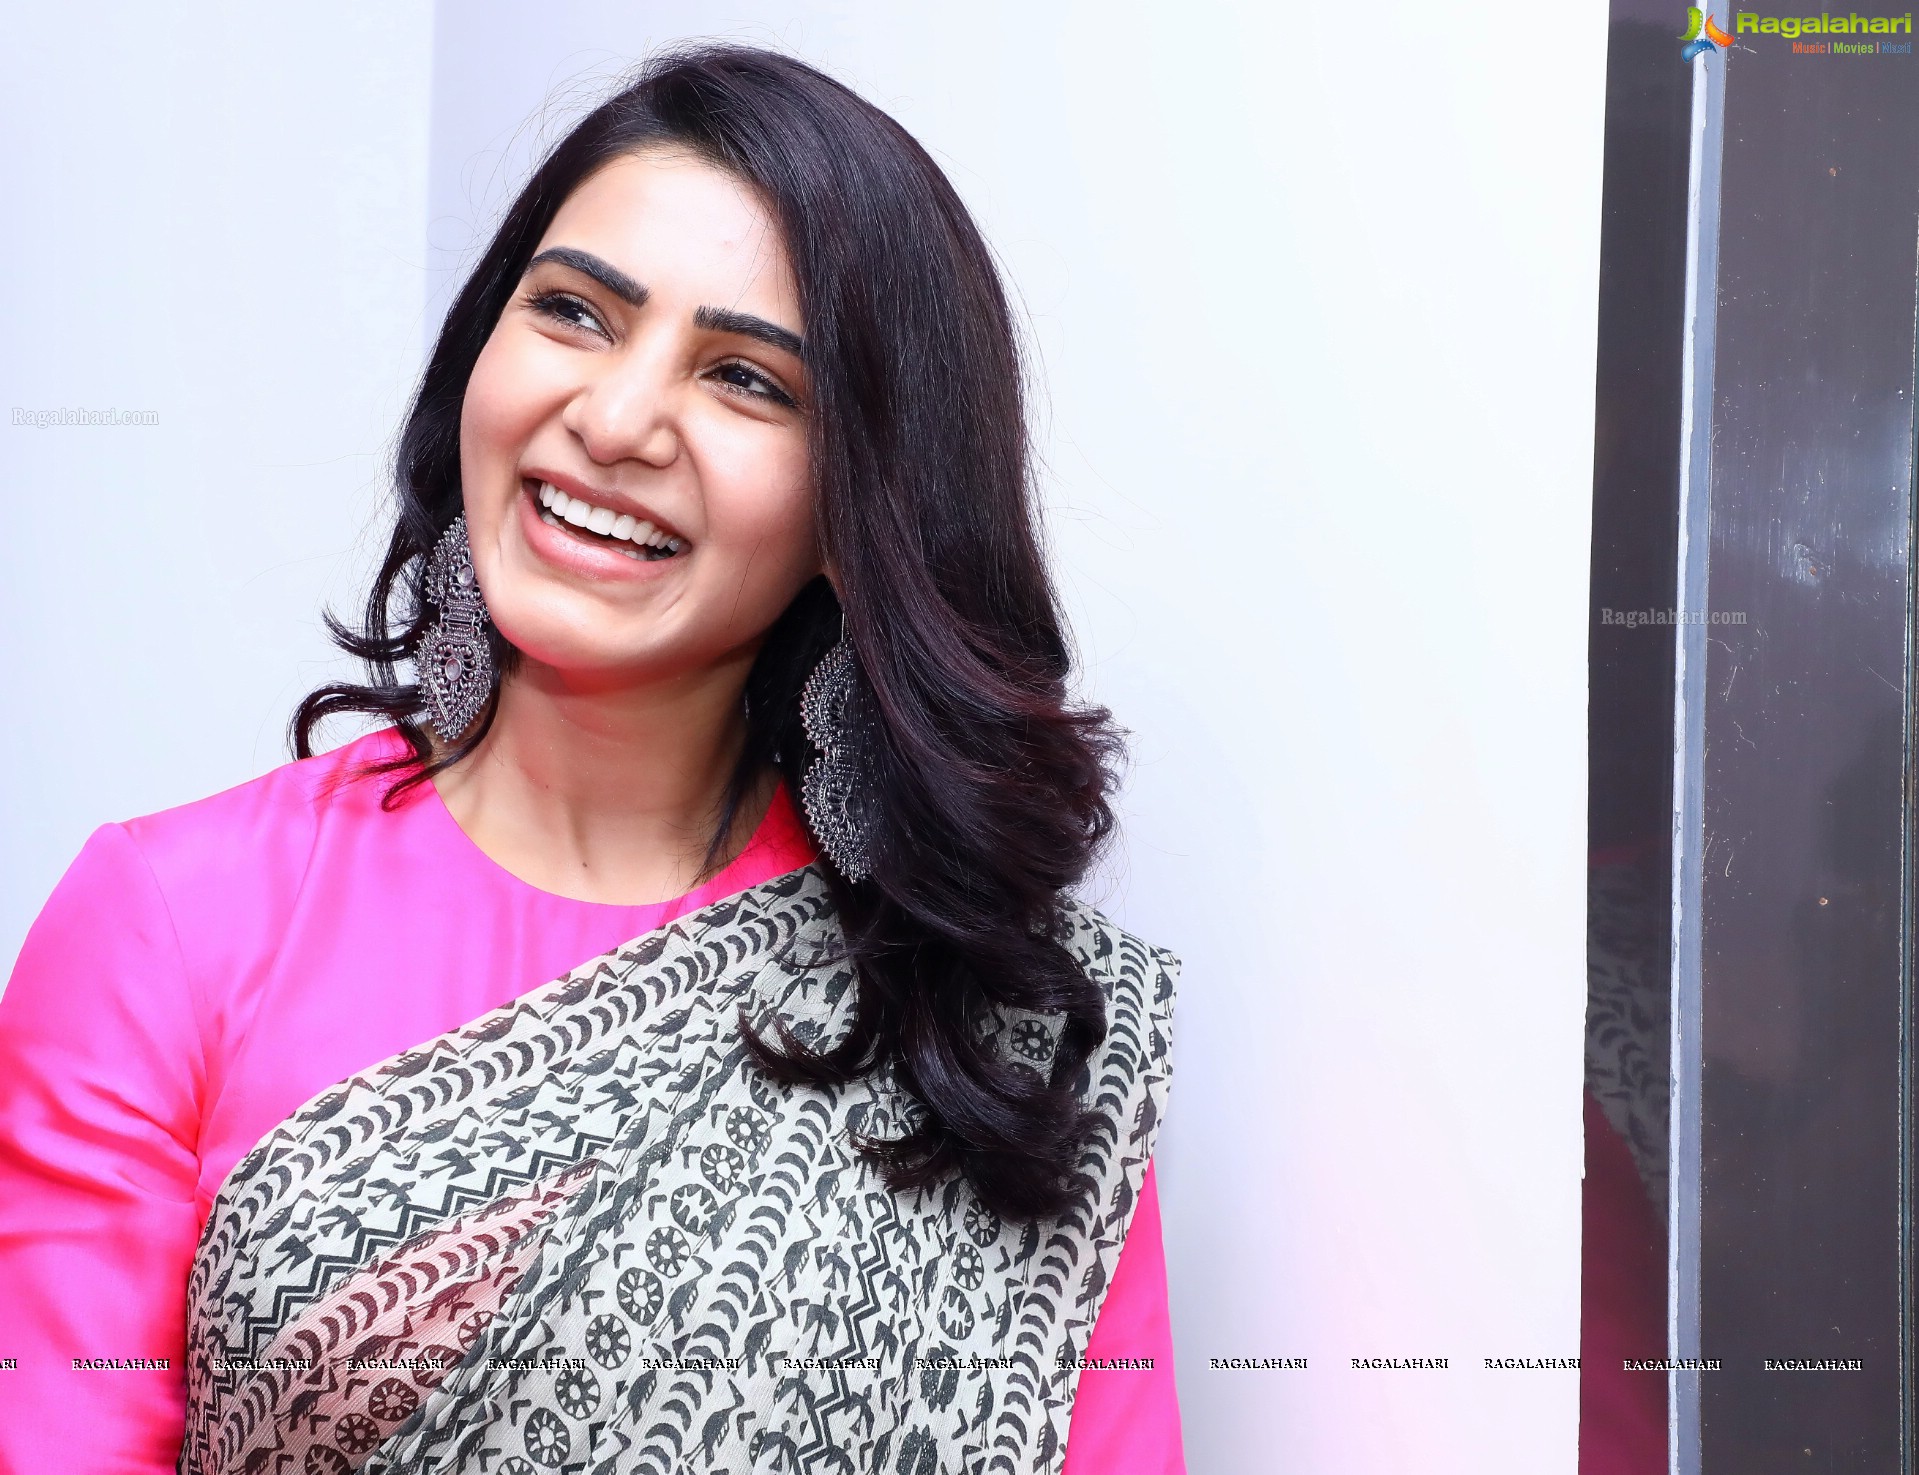 Samantha participated in a Social Initiative taken up by PHONAK in association with AUM